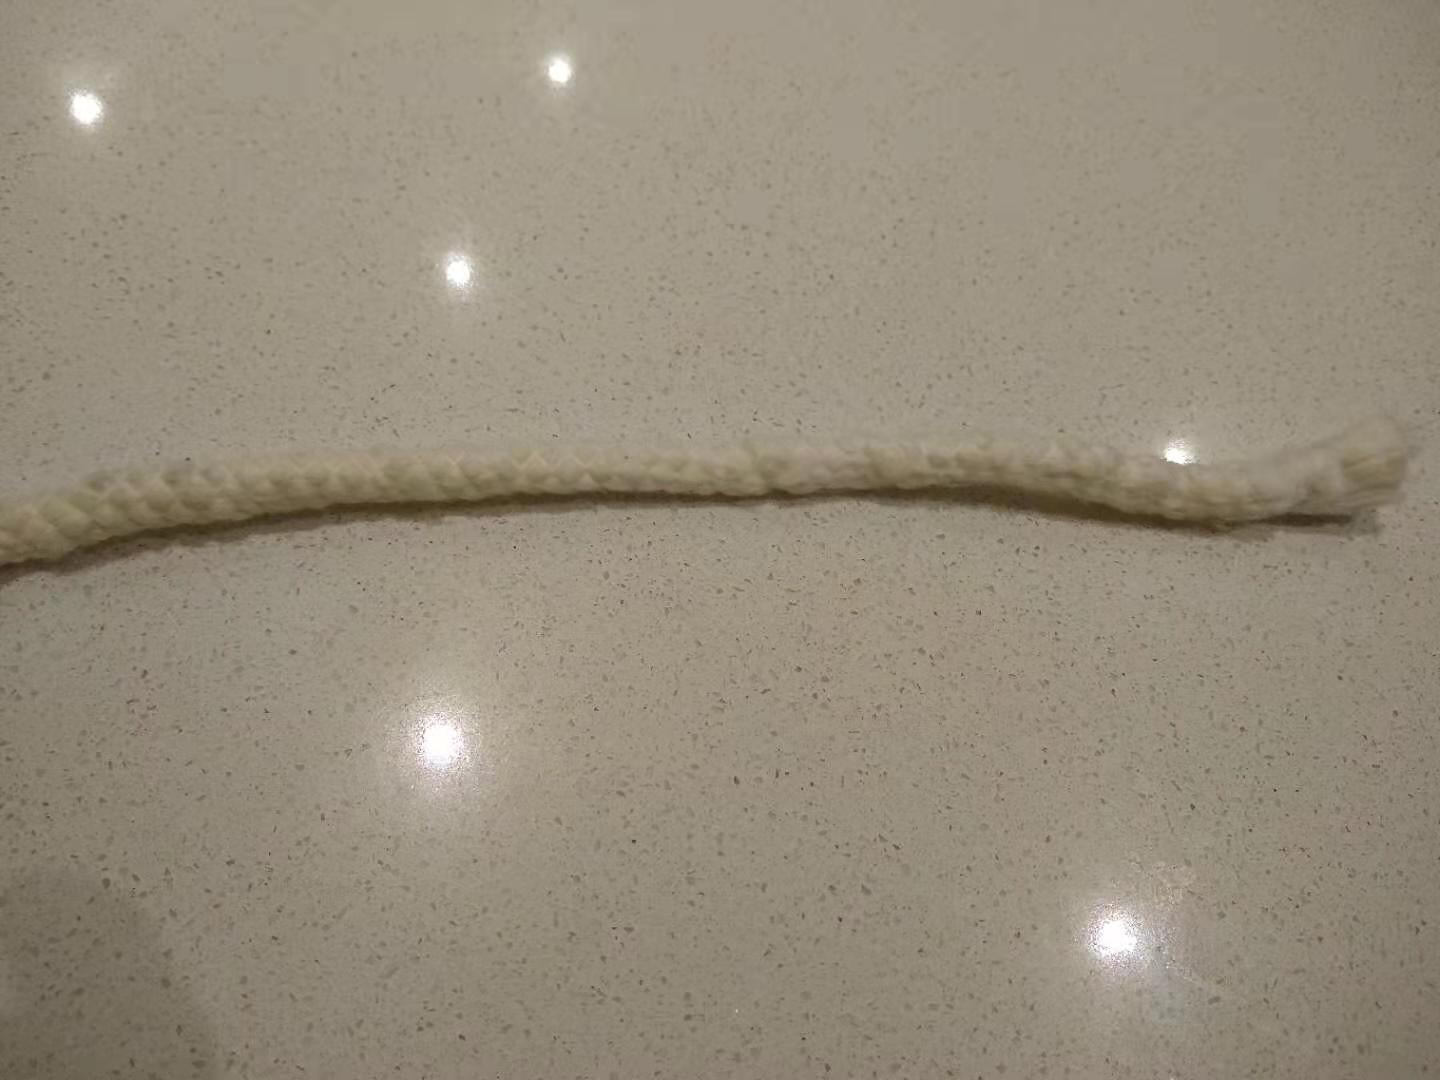 This is the rope I found in the soft
      lab.